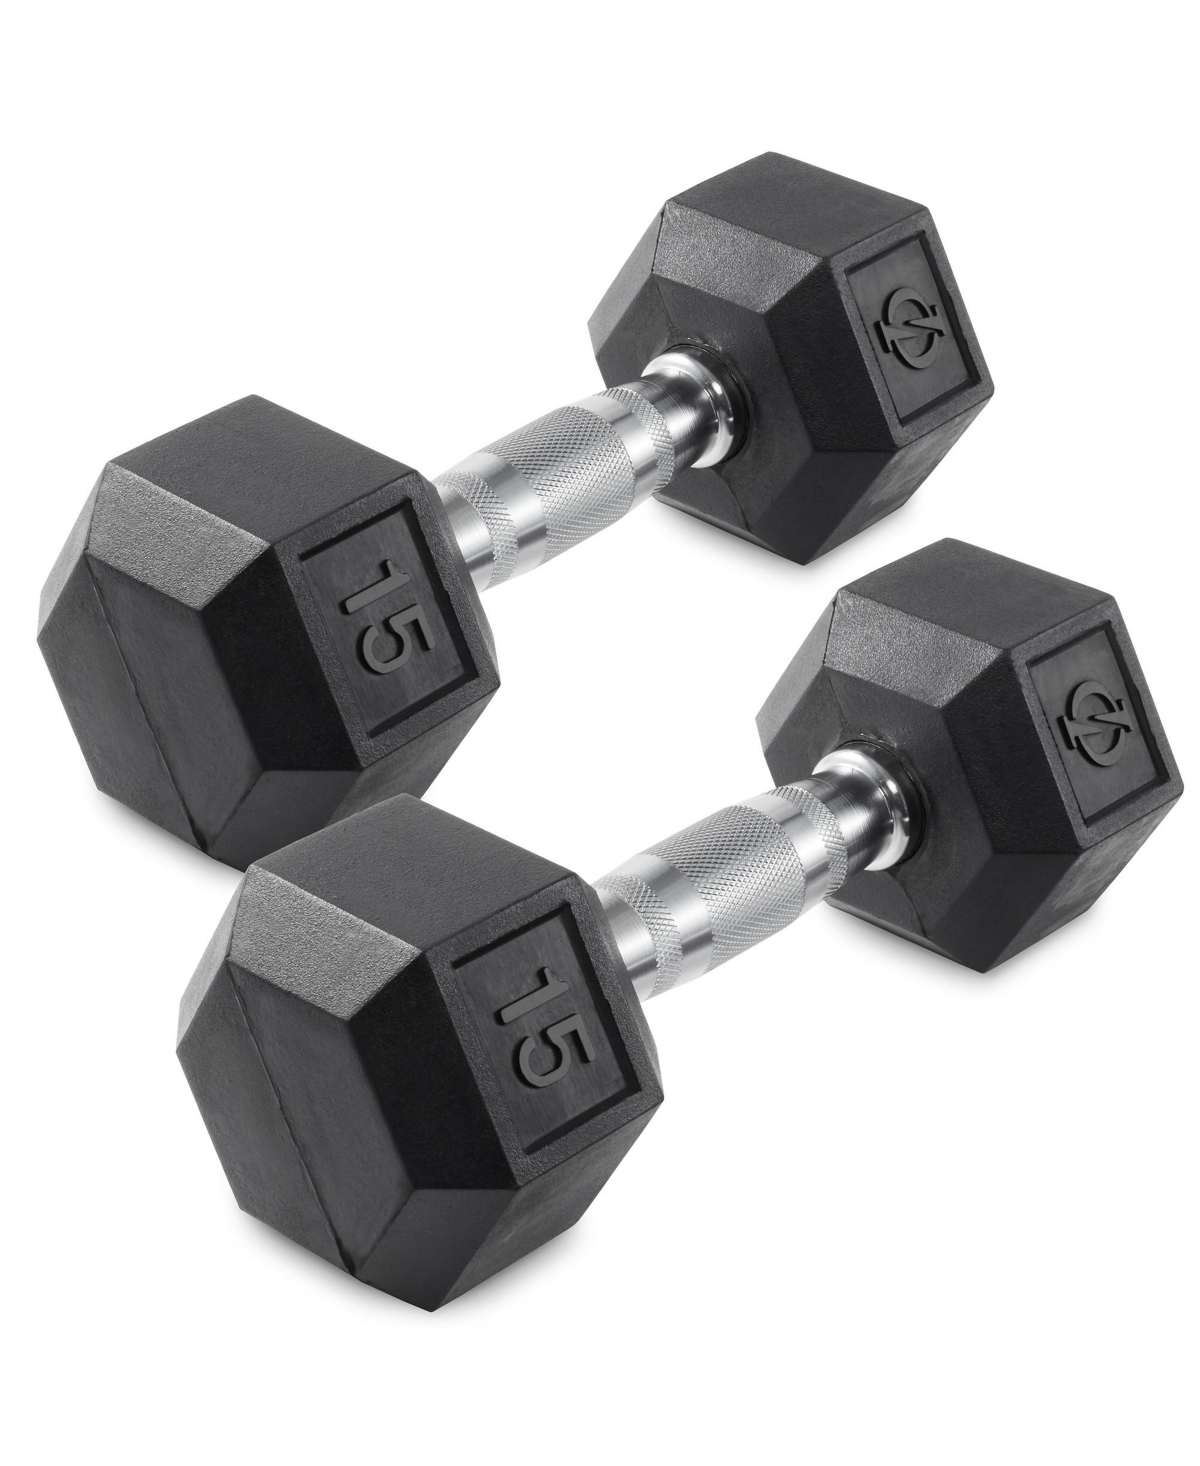 Rubber Coated Hex Dumbbell Hand Weights, 15 lb Pair - Black